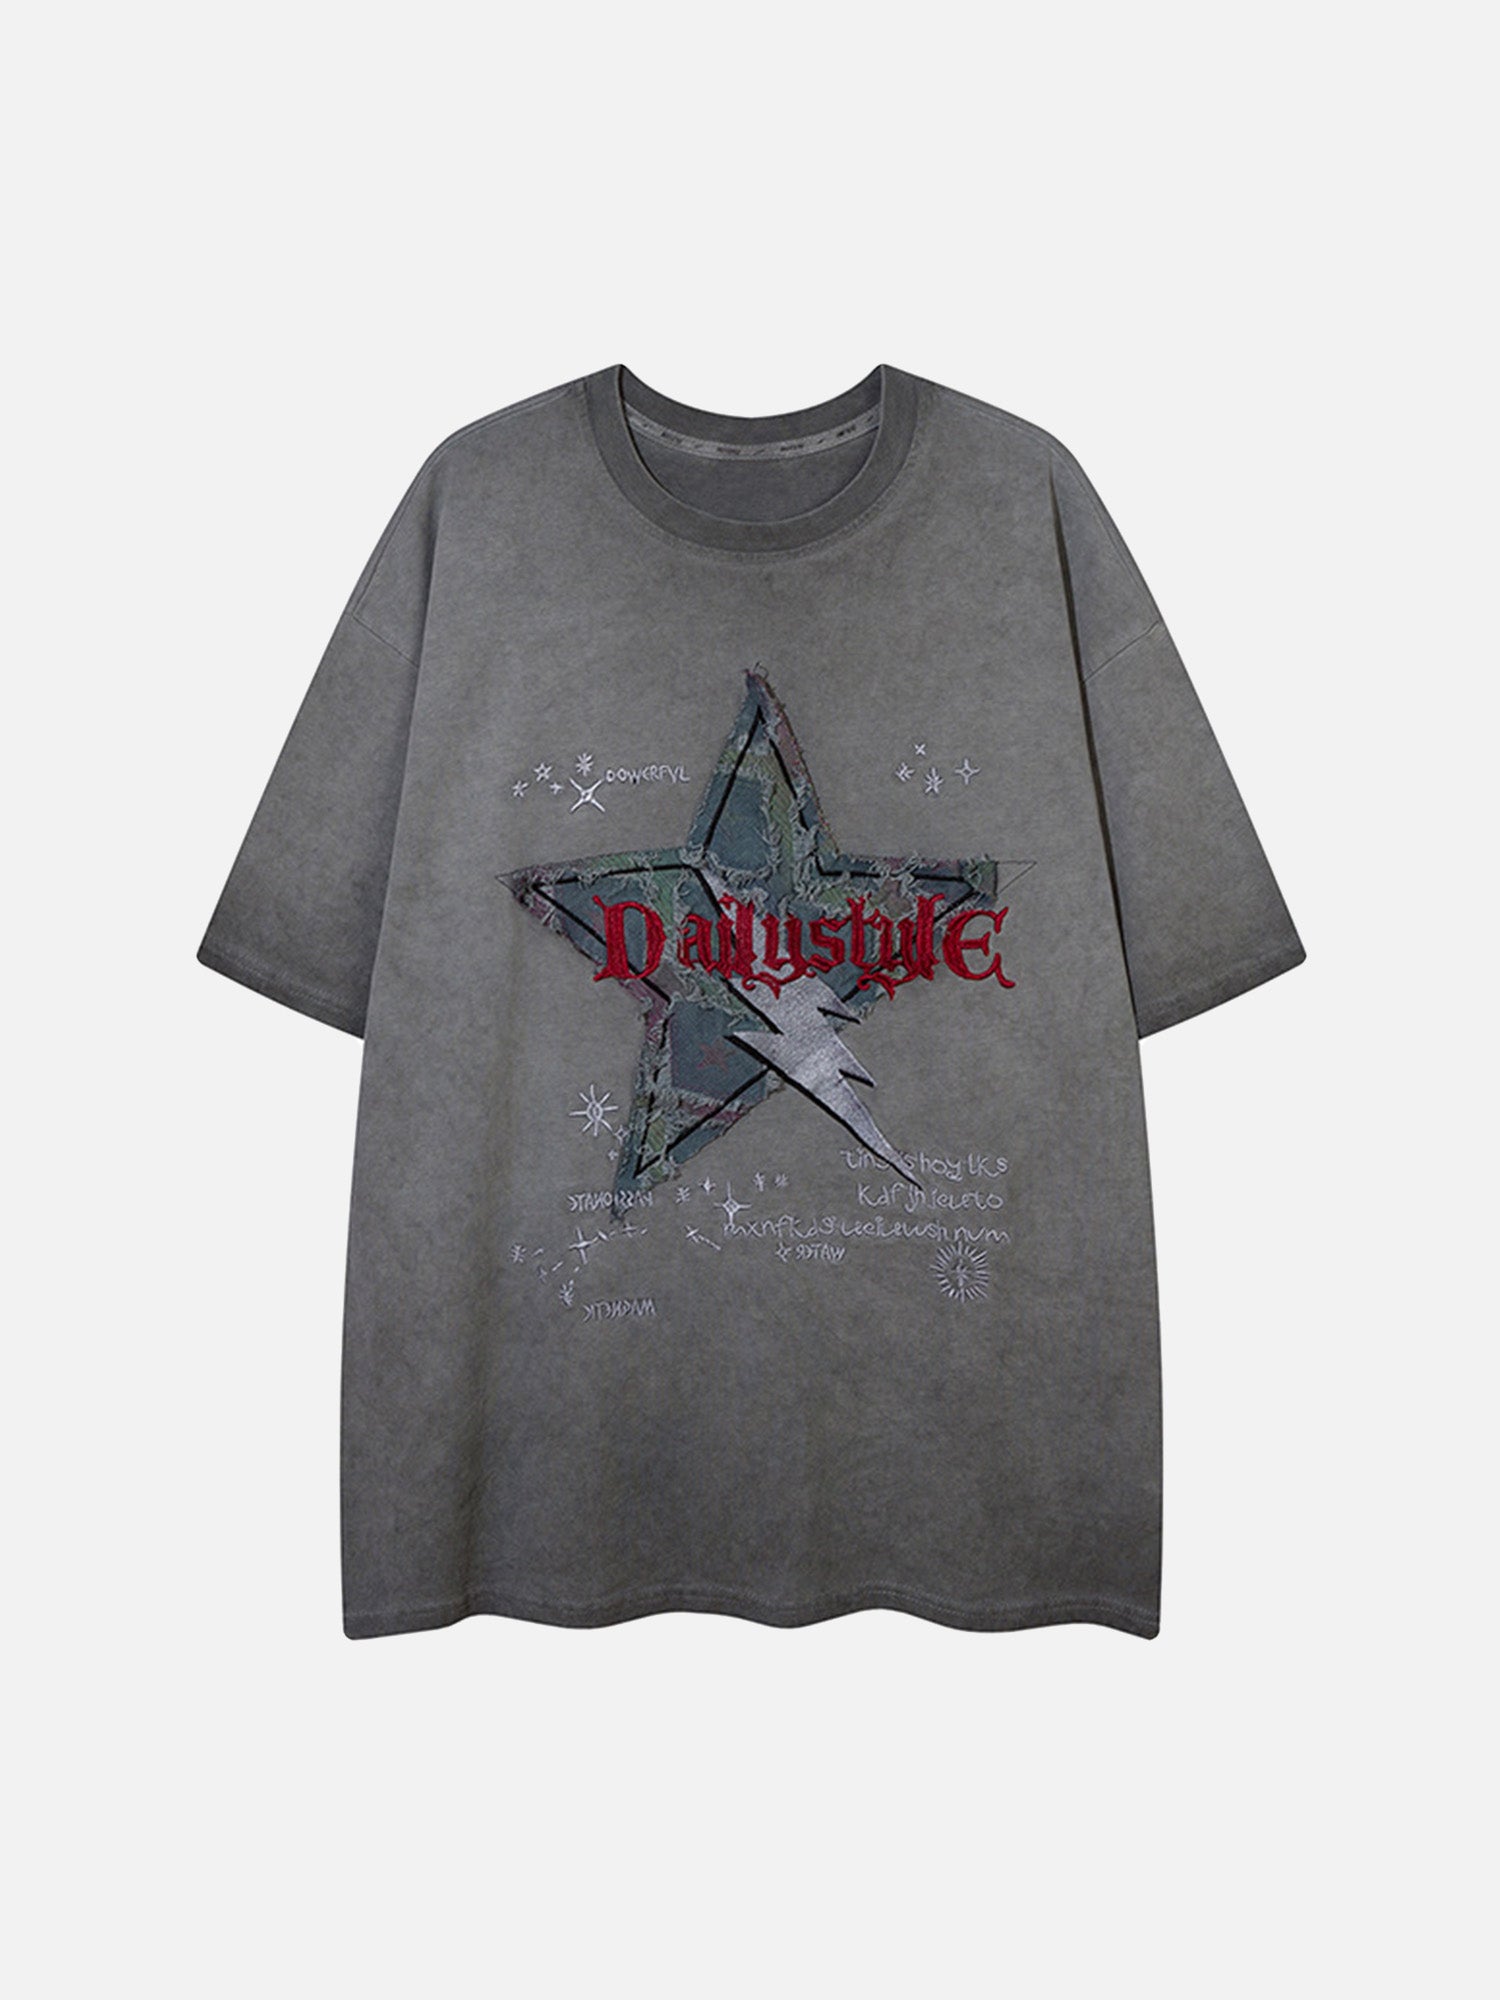 Washed Distressed Denim Patch Embroidered Star T-shirt